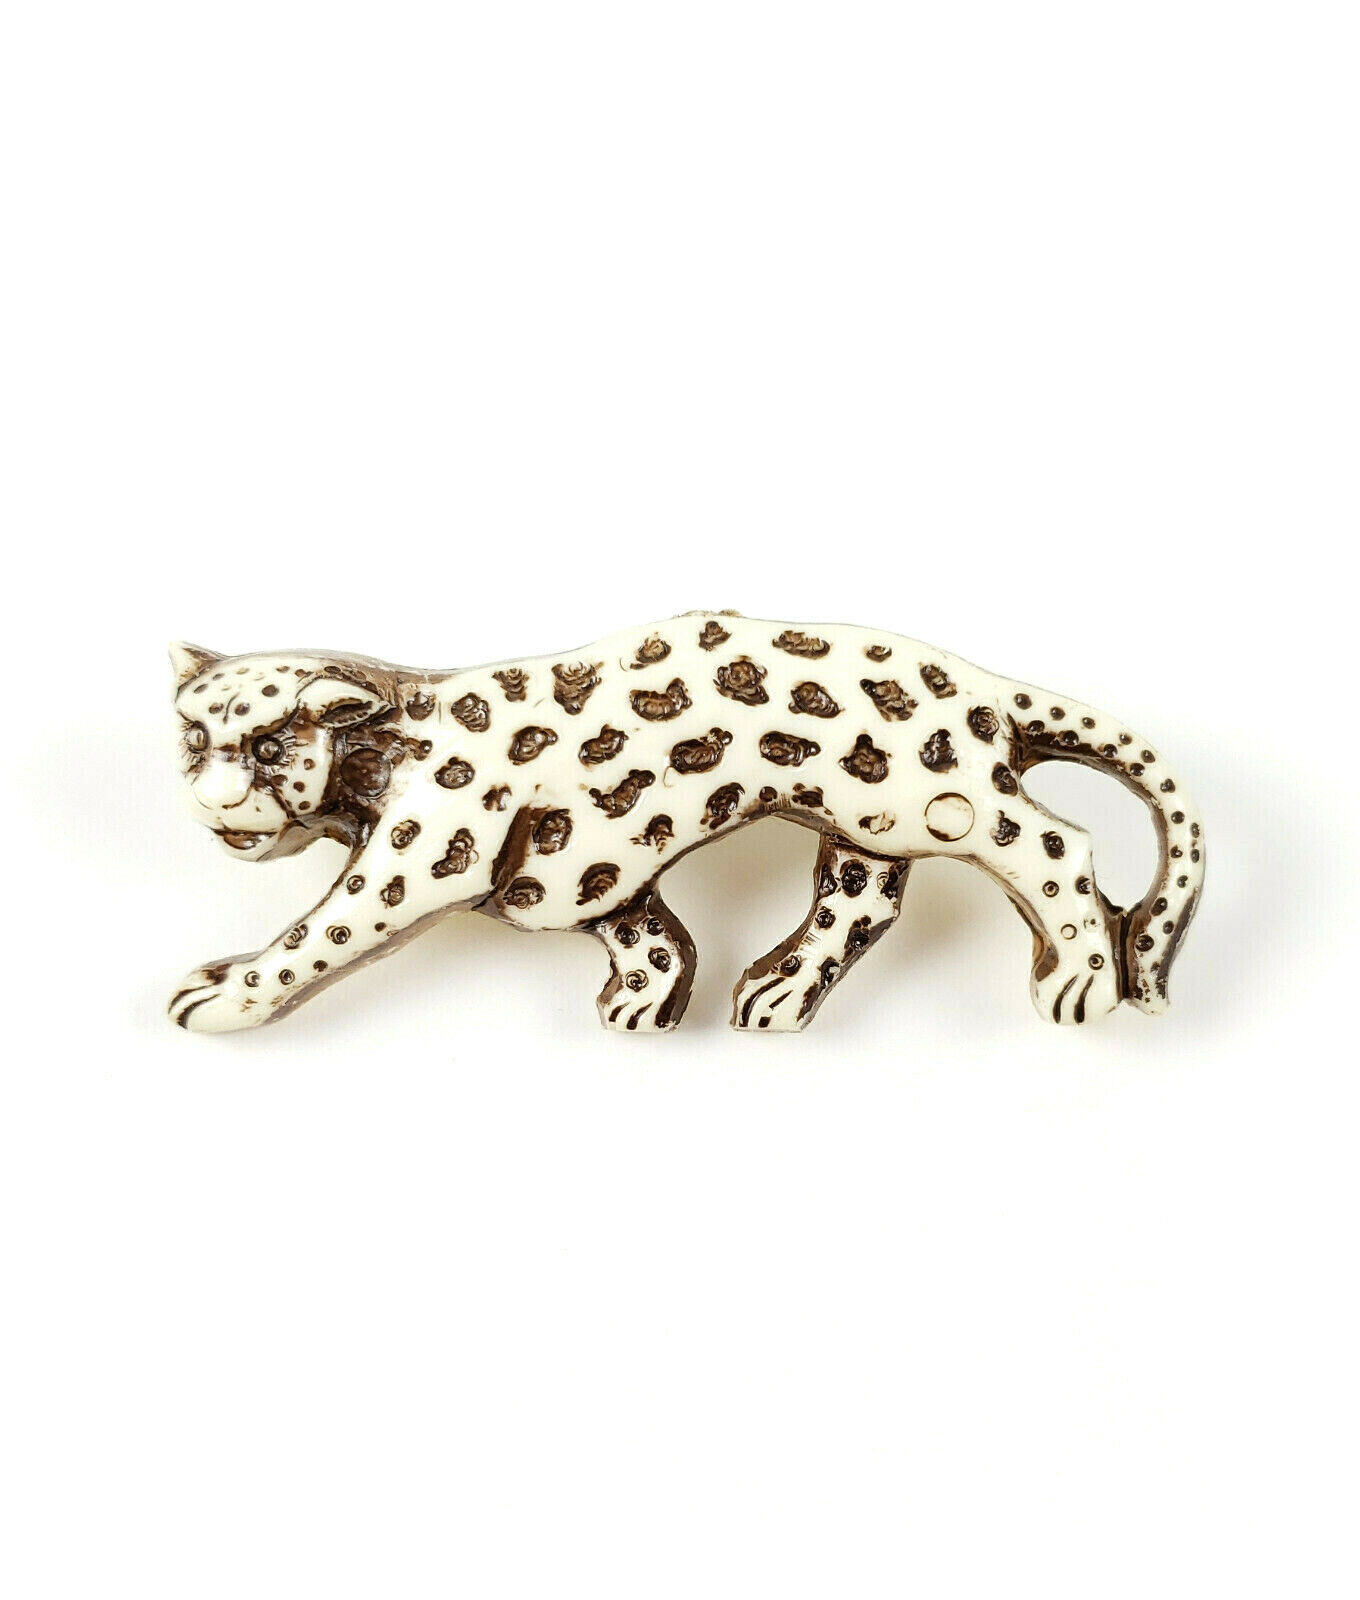 Vintage Prowling Cheetah Brown And White Celluloid Plastic Pin Brooch